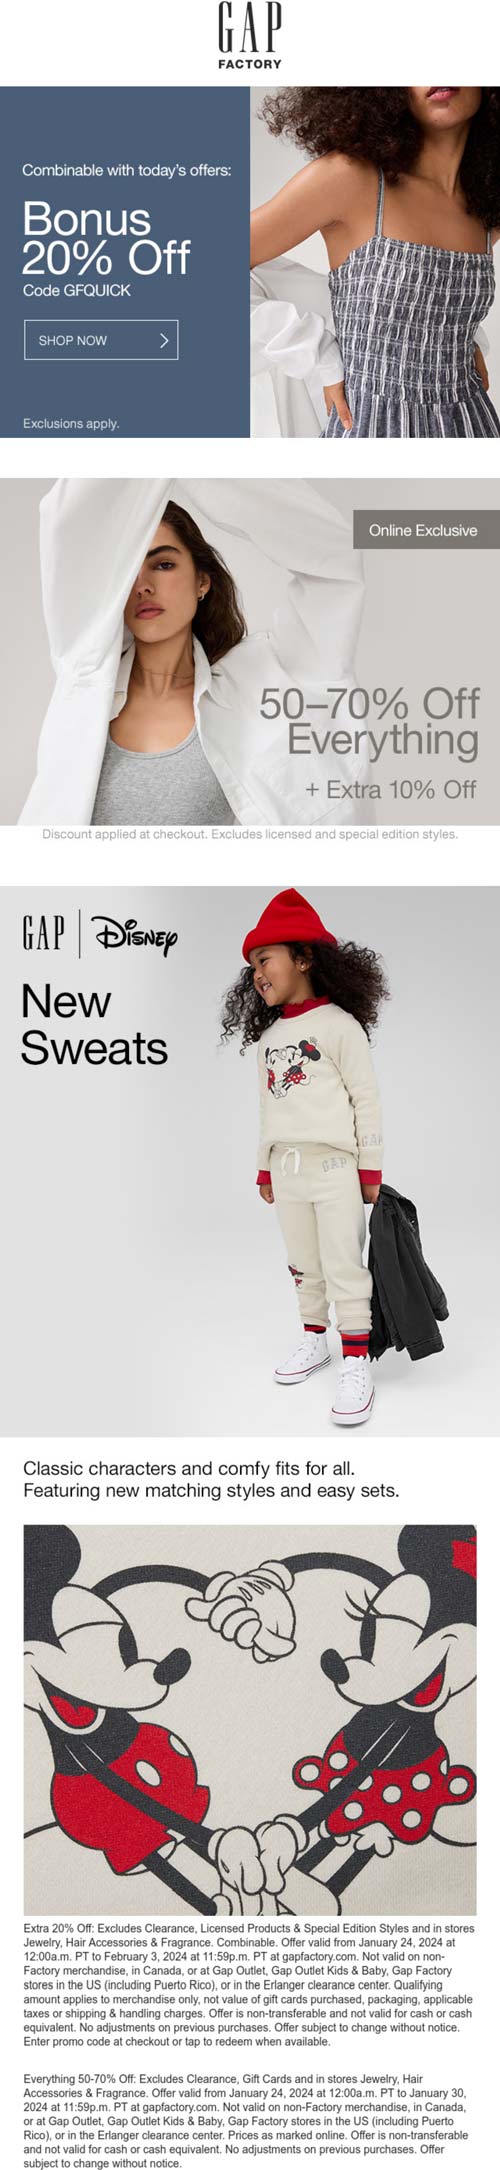 Gap Factory stores Coupon  60-80% off everything & more online at Gap Factory via promo code GFQUICK #gapfactory 